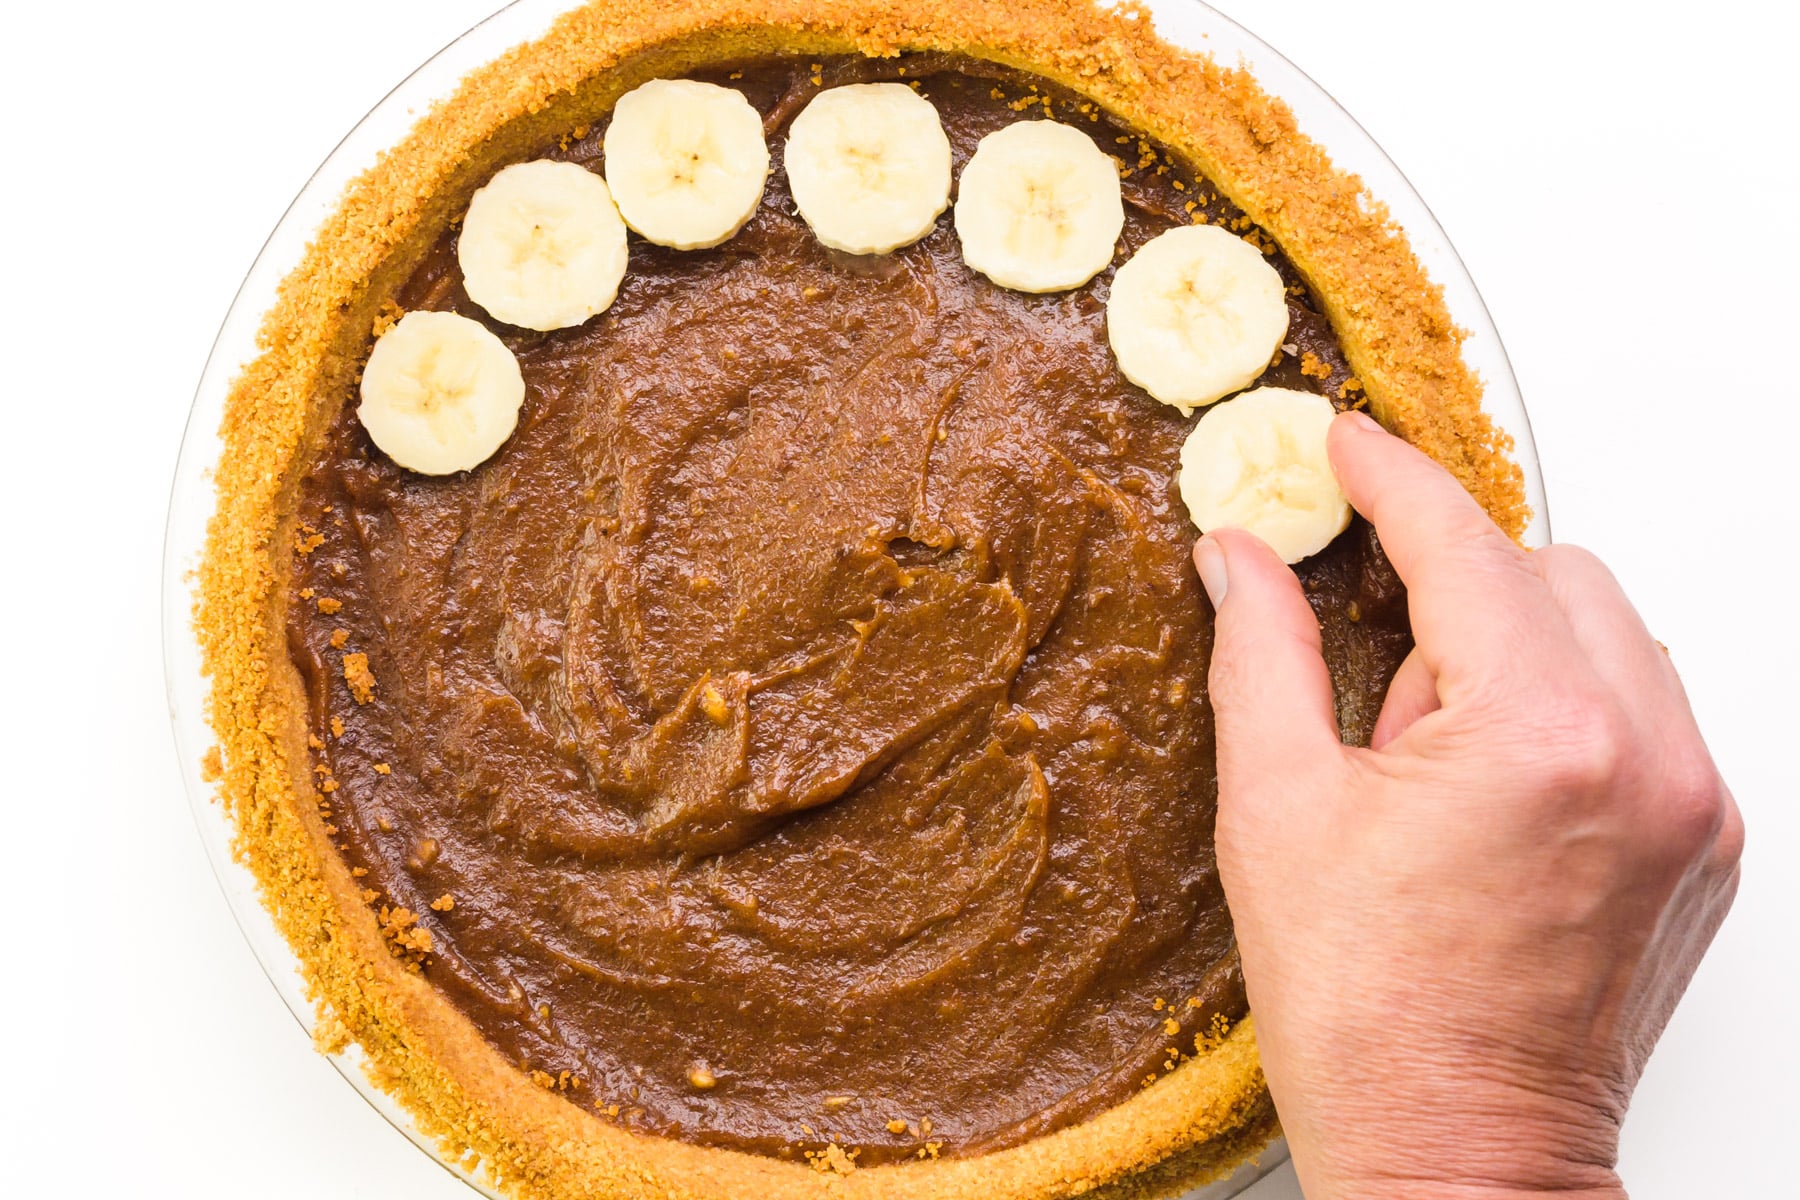 A hand places banana slices over filling in a pie crust.